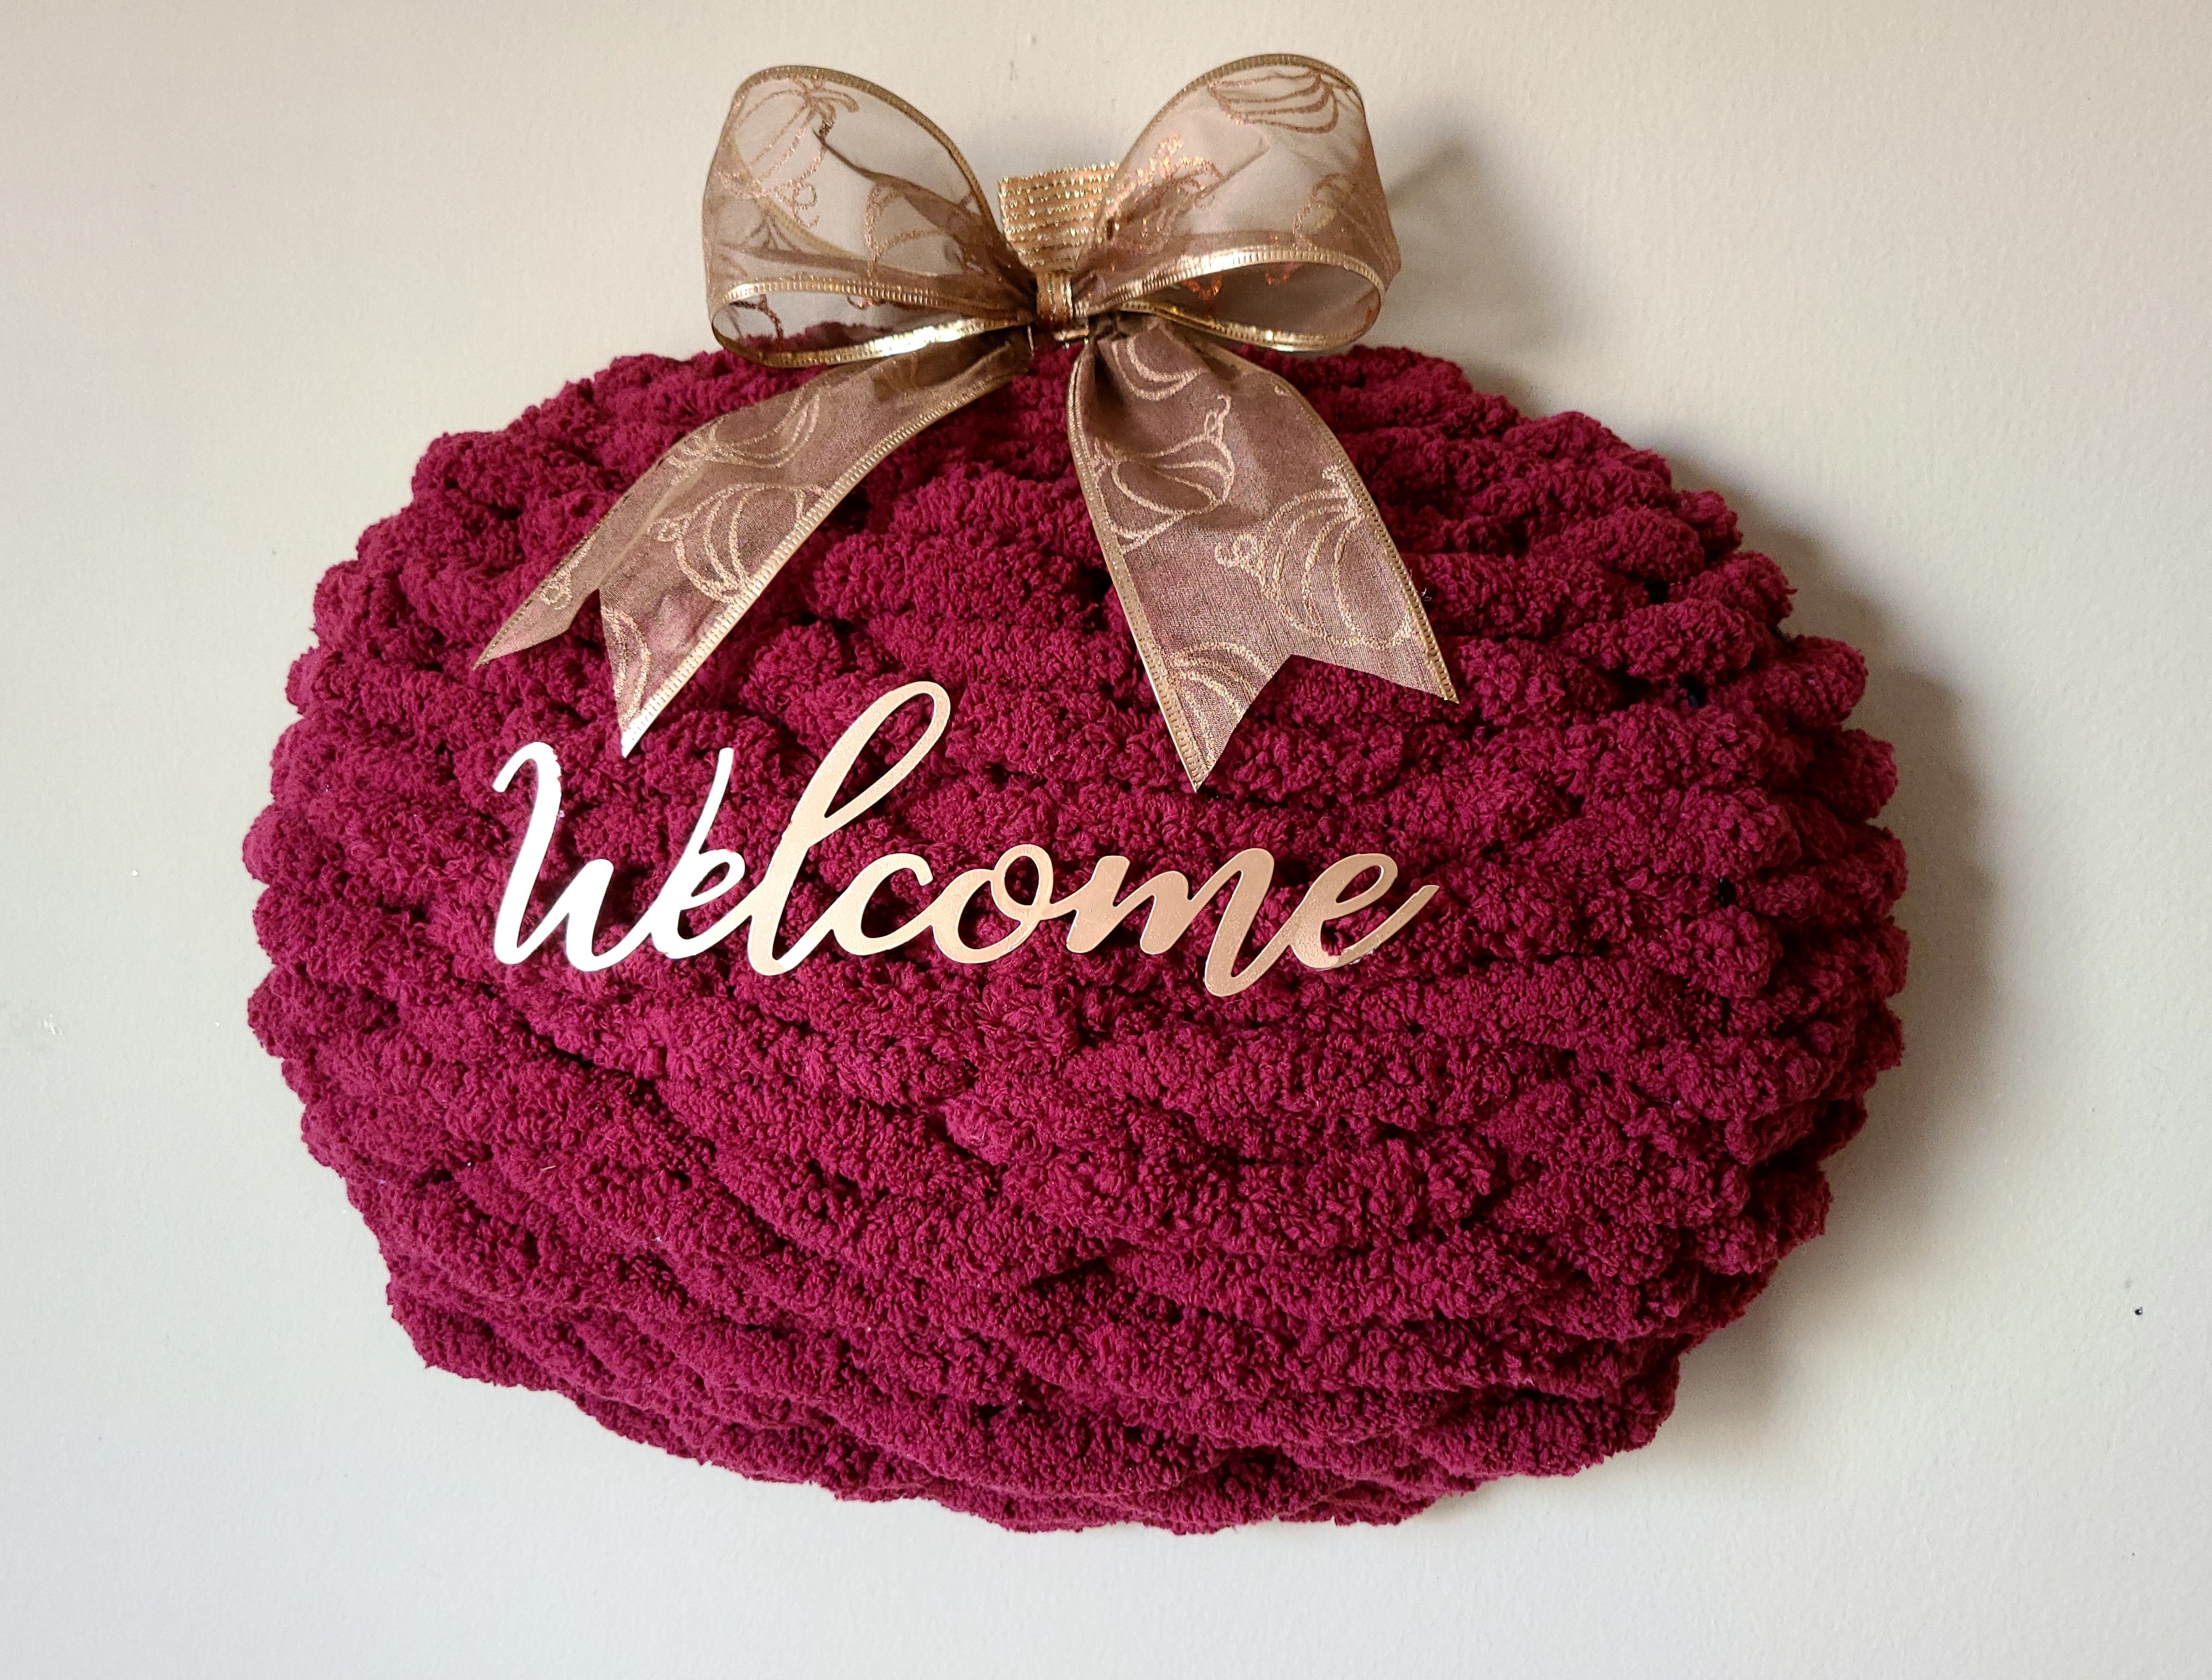 Burgundy chunky yarn pumpkin wreath with copper "welcome" and bow on top hanging on the wall.